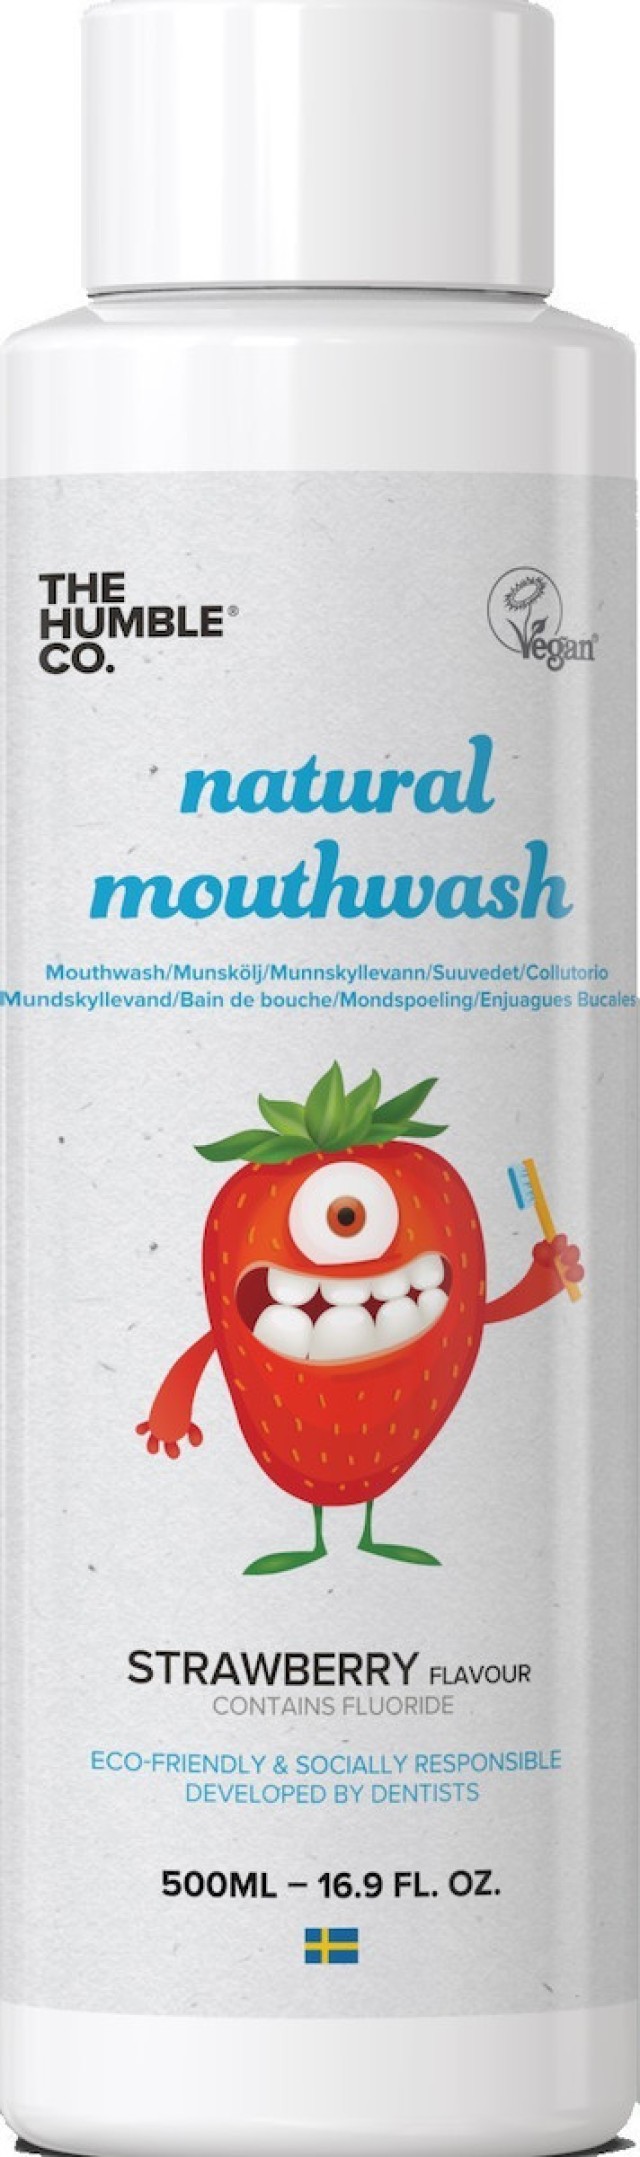 The Humble Co. Natural Mouthwash Kids Strawberry Παιδικό Φυσικό Στοματικό Διάλυμα Με Γεύση Φράουλα 500 ml product photo